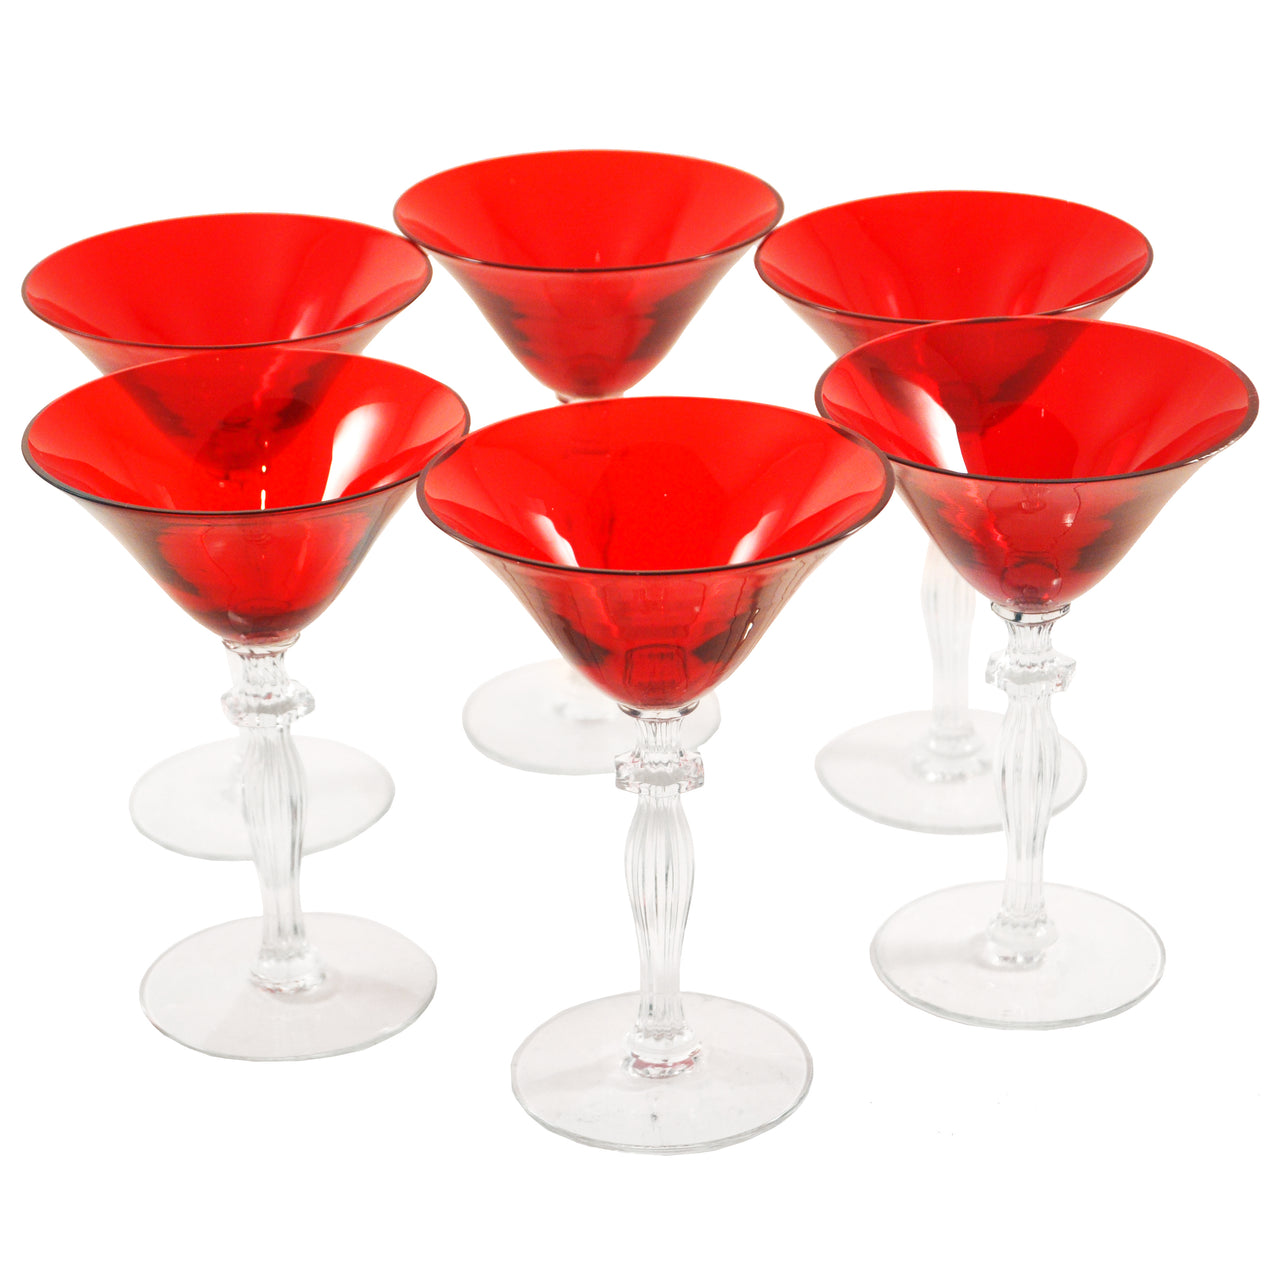 Art Deco Morgantown Glass Empress Martini or Cocktails with Spanish Red  Bowls - Set of 6